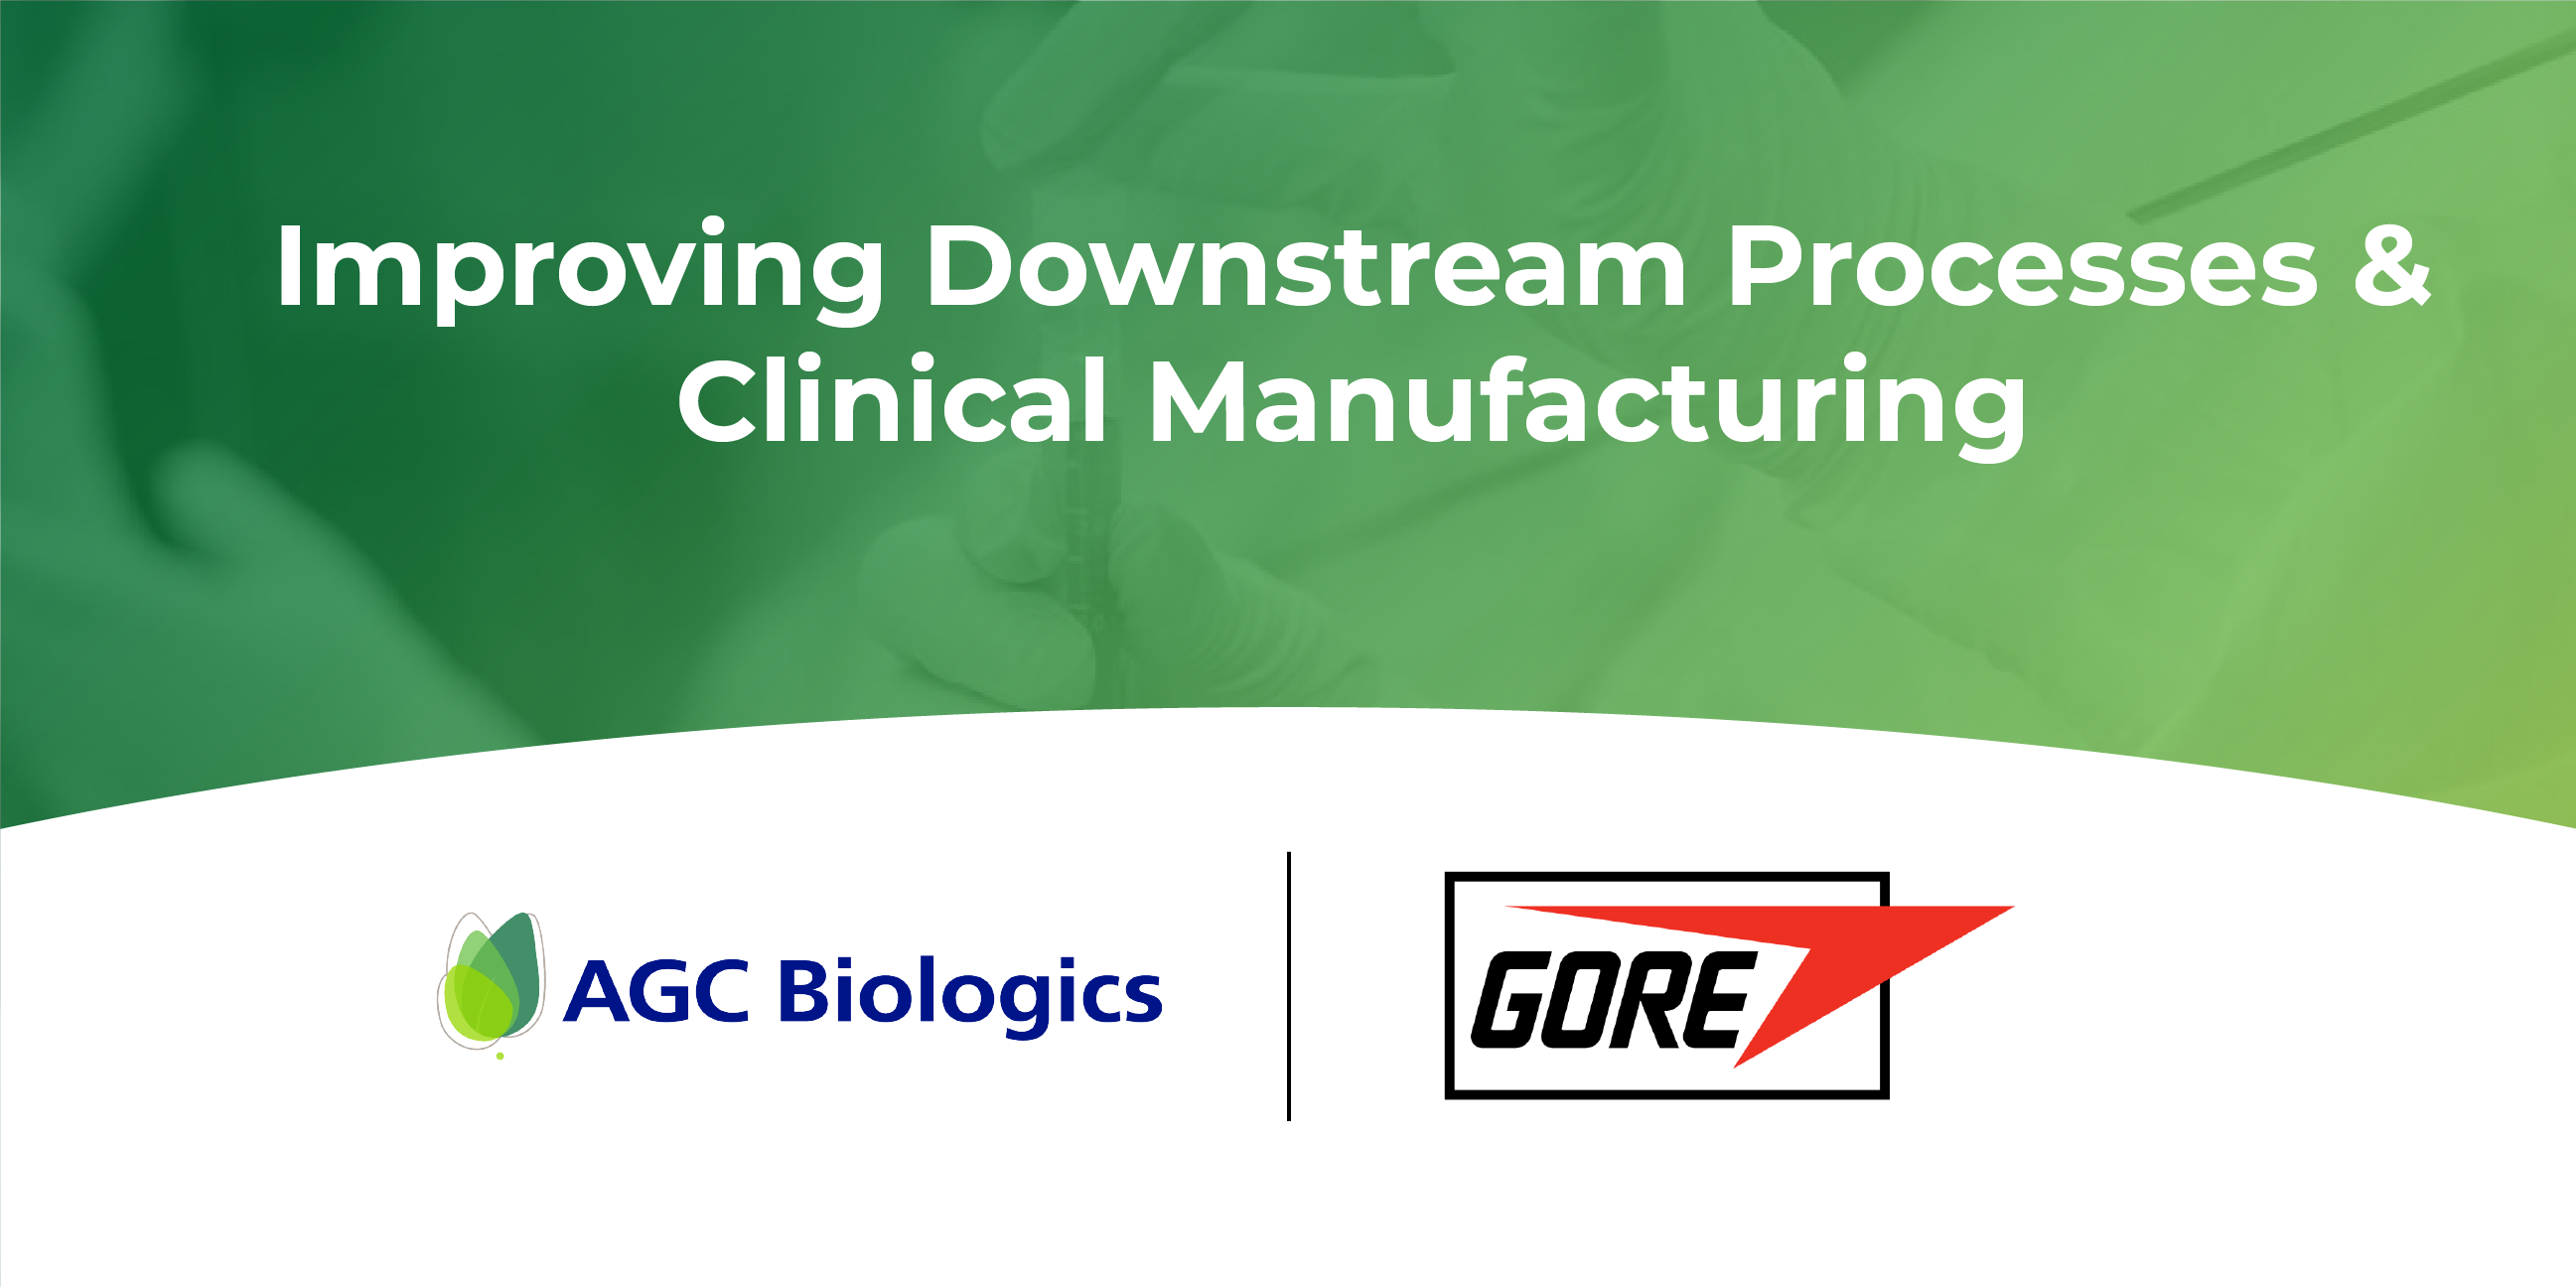 AGC Biologics partners with GORE.